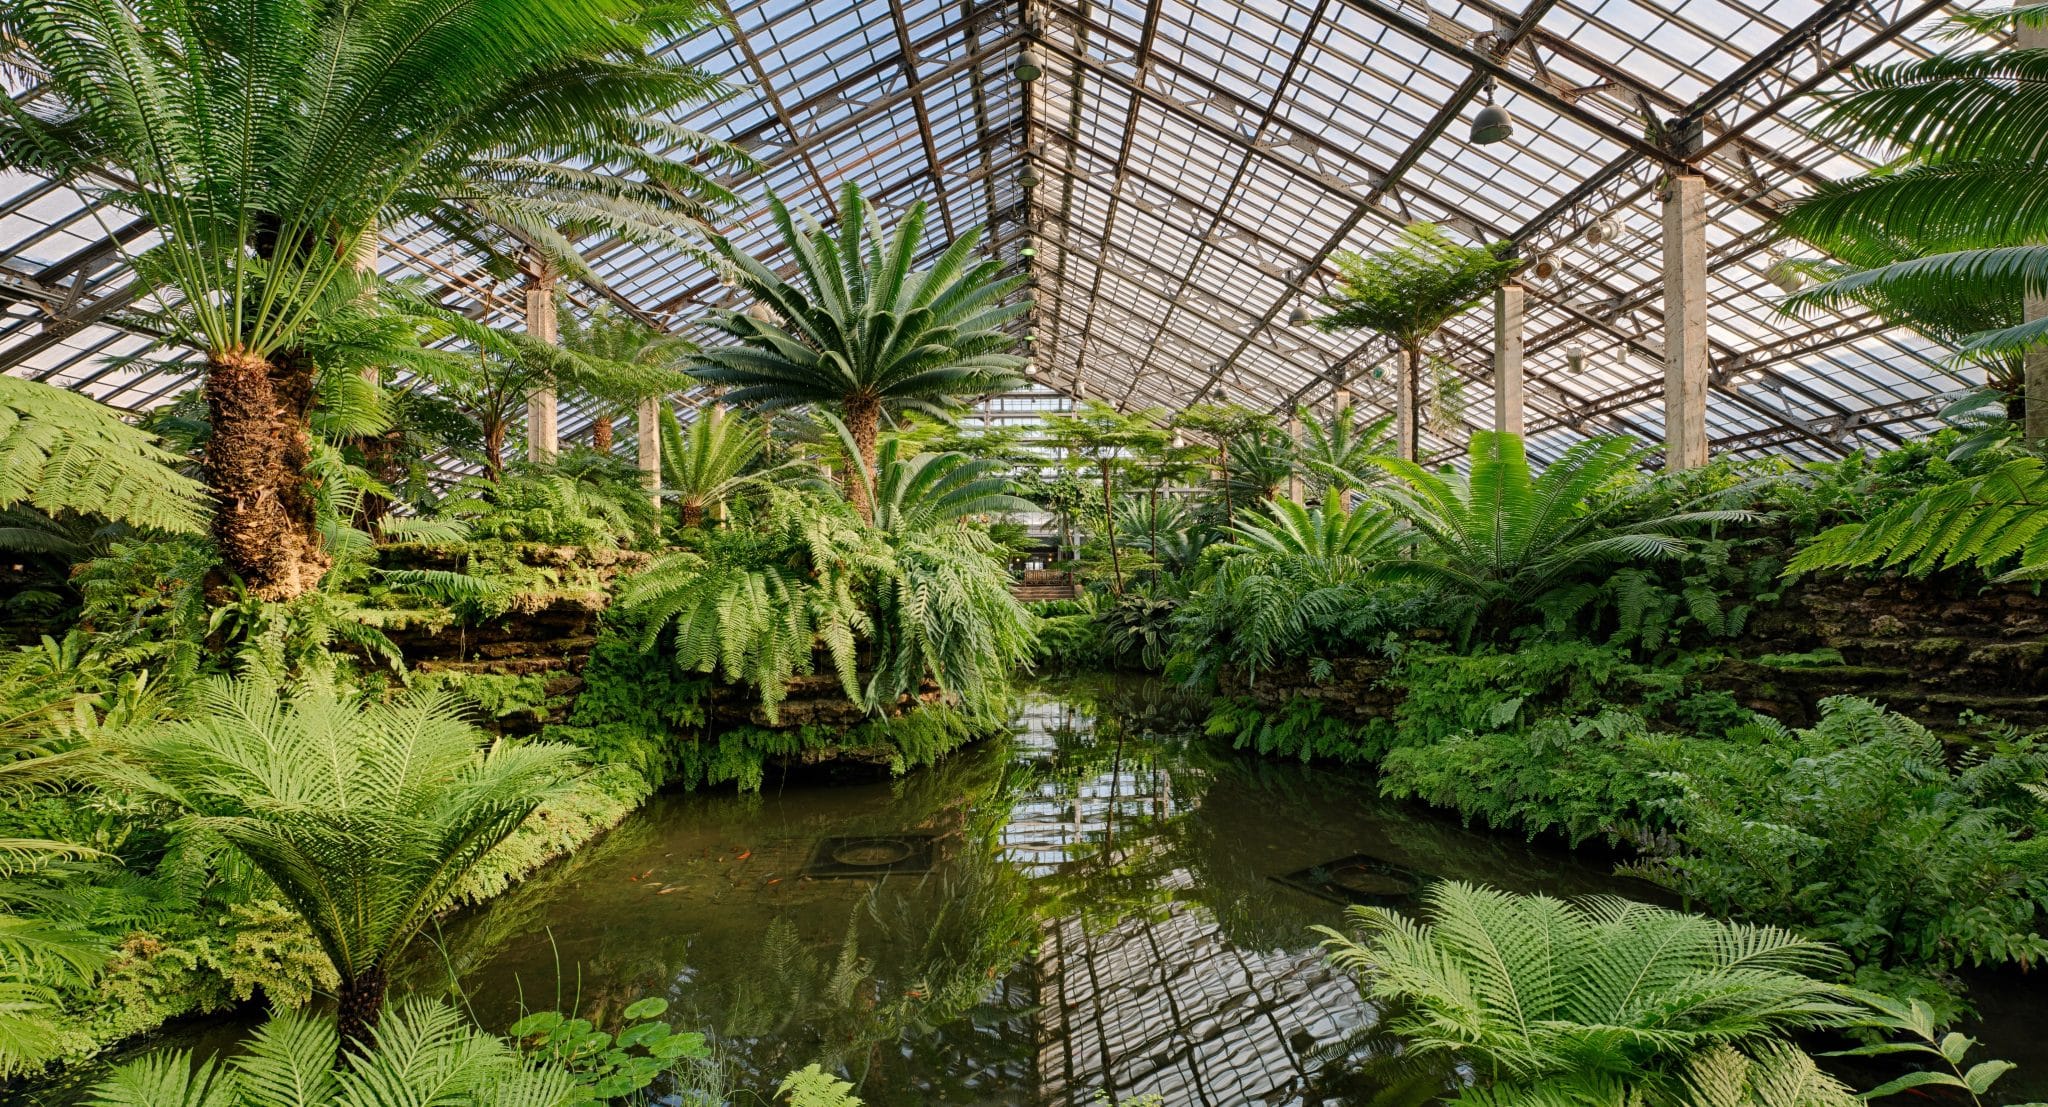 Image showing the verdant plants and flowers of the free Garfield Park Conservatory in Chicago